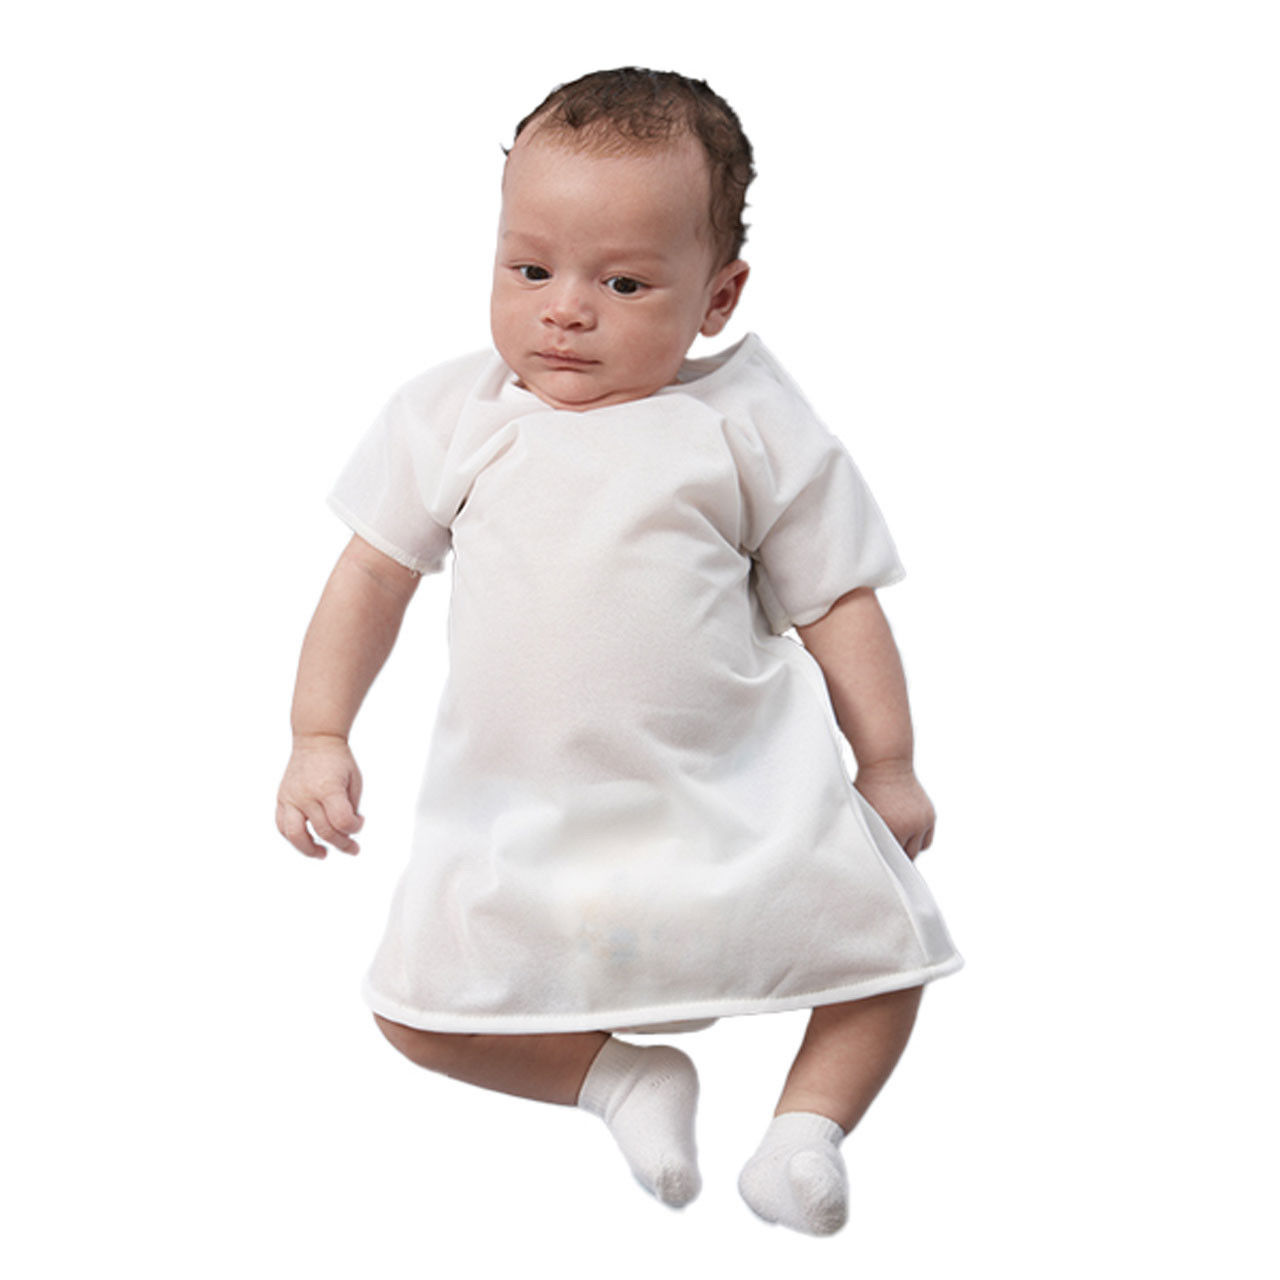 What fabric is used for the wholesale baby hospital gown - Pediatric Hospital Gowns, White - In Bulk?